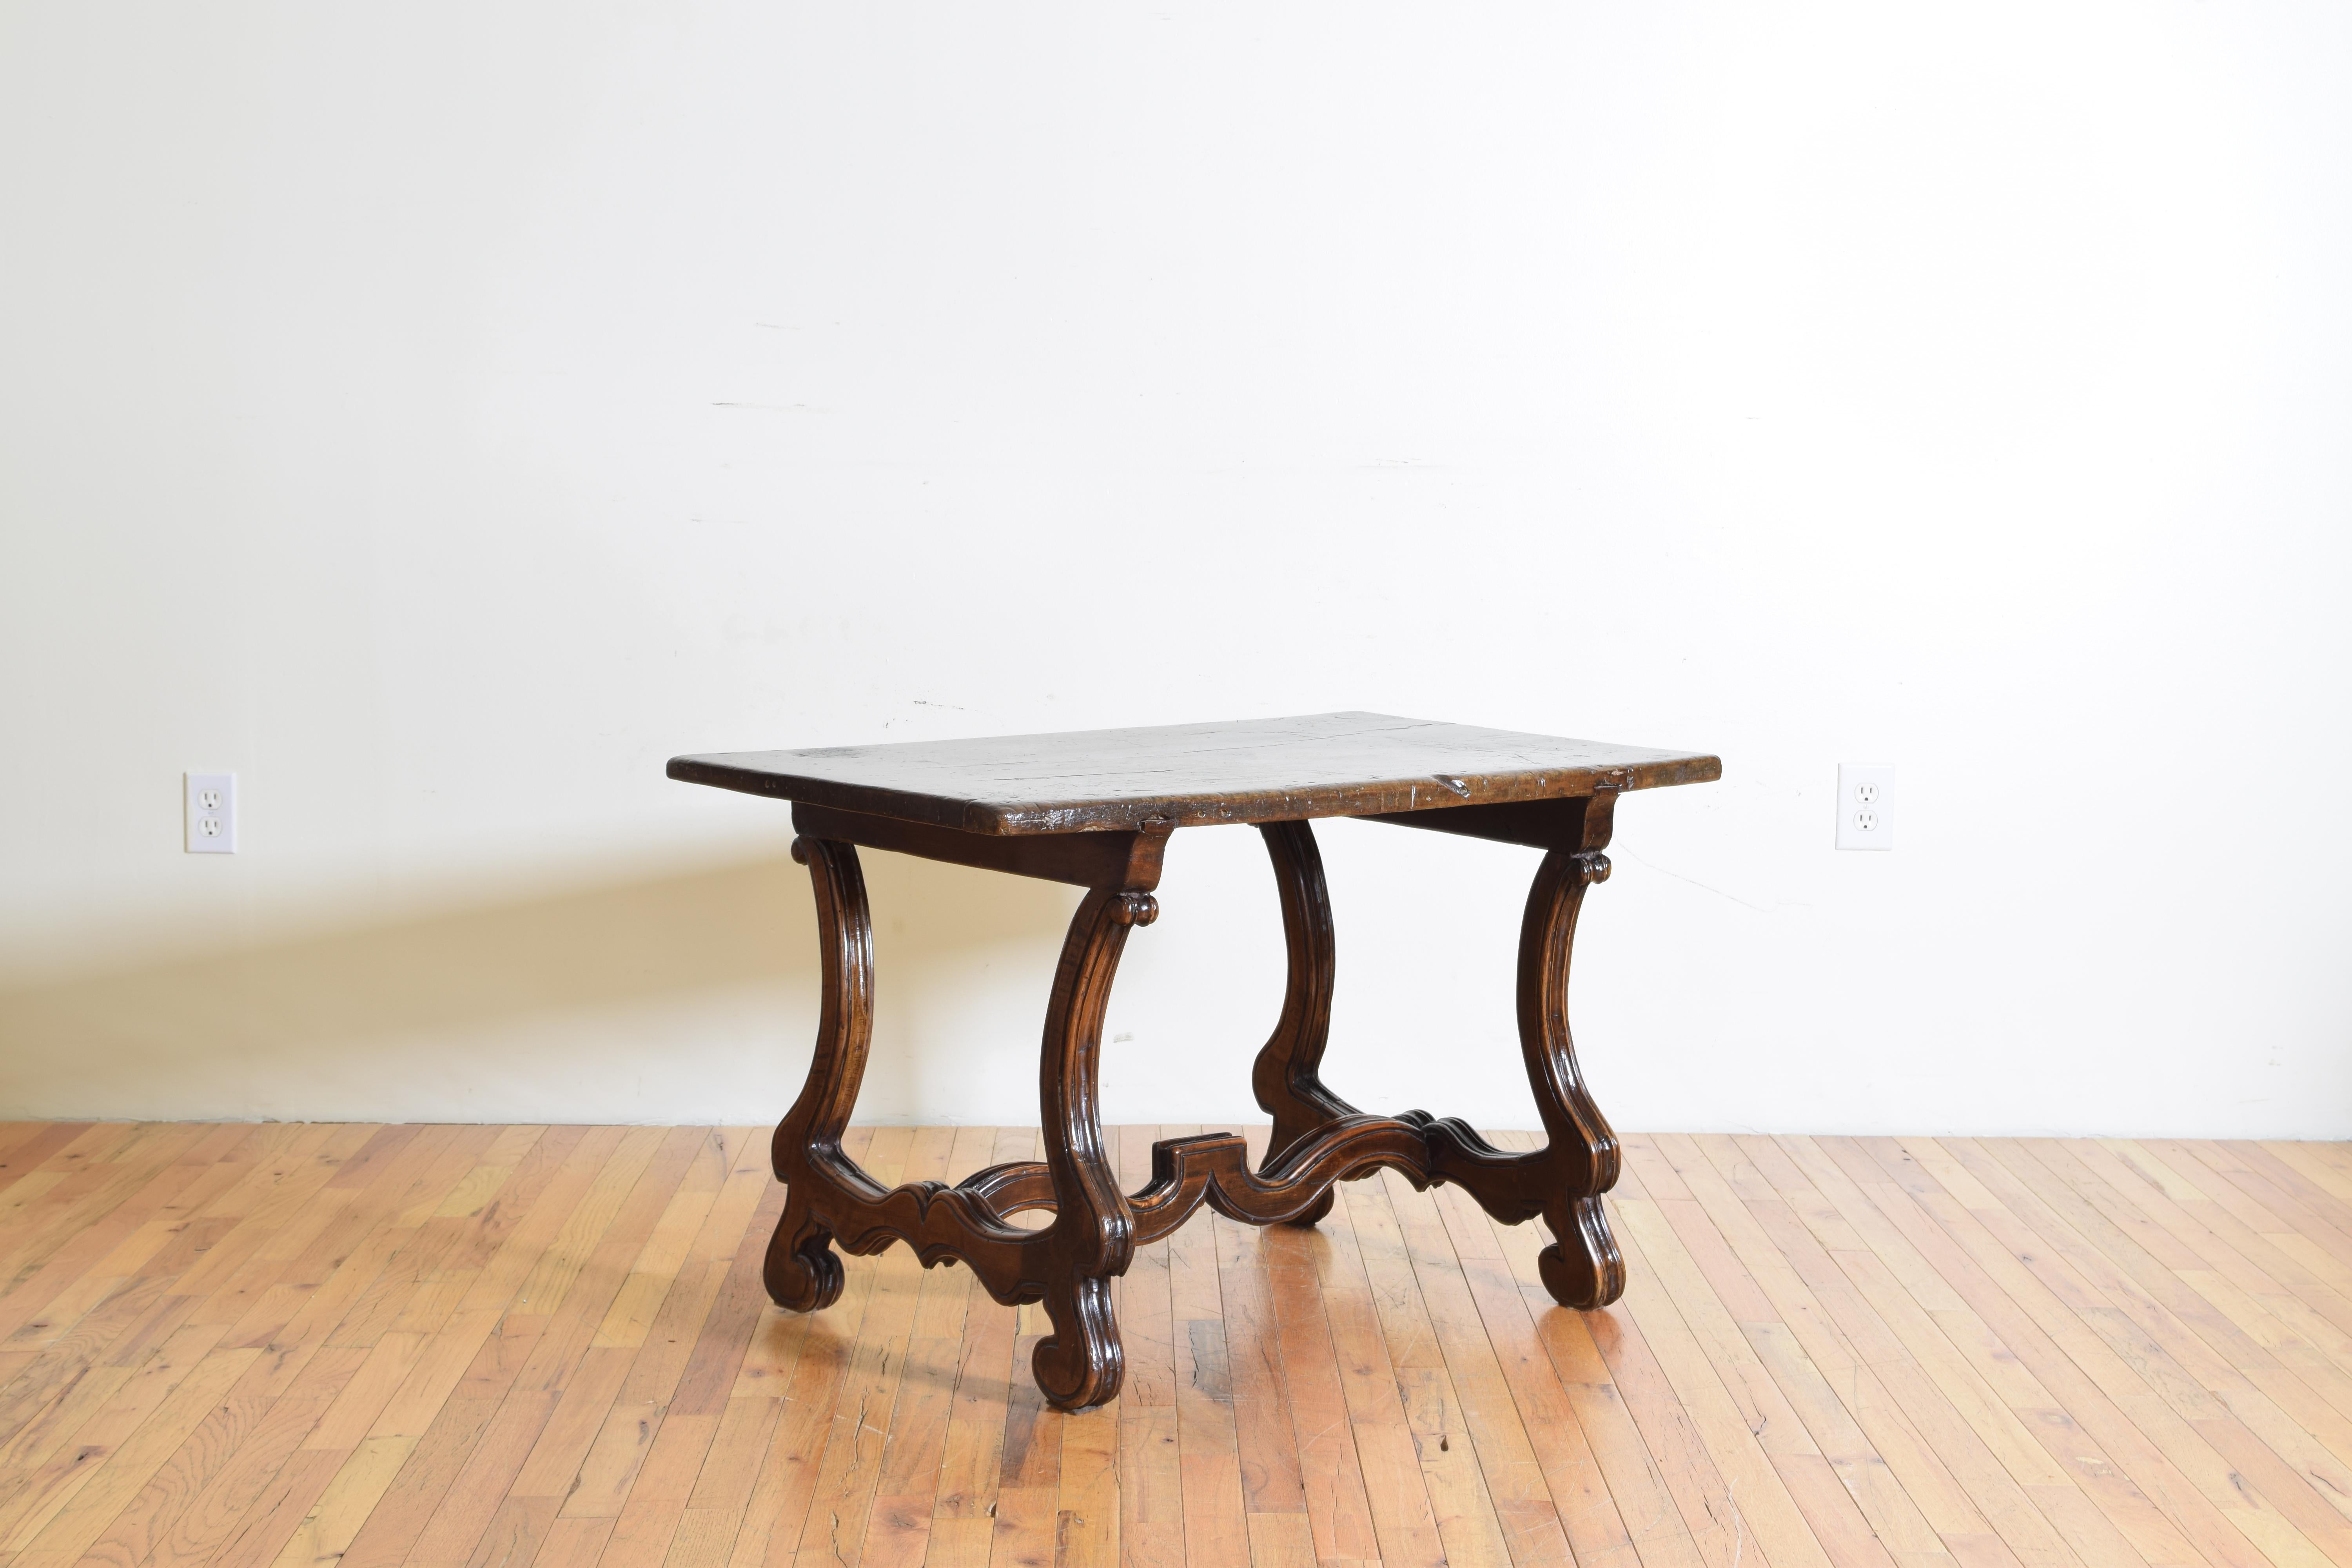 Combining antique elements from the early 18th century this table has a rectangular top raised on carved legs and a shaped stretcher, the legs and stretcher of the French Os de Mouton style popular in the first half of the 18th century.